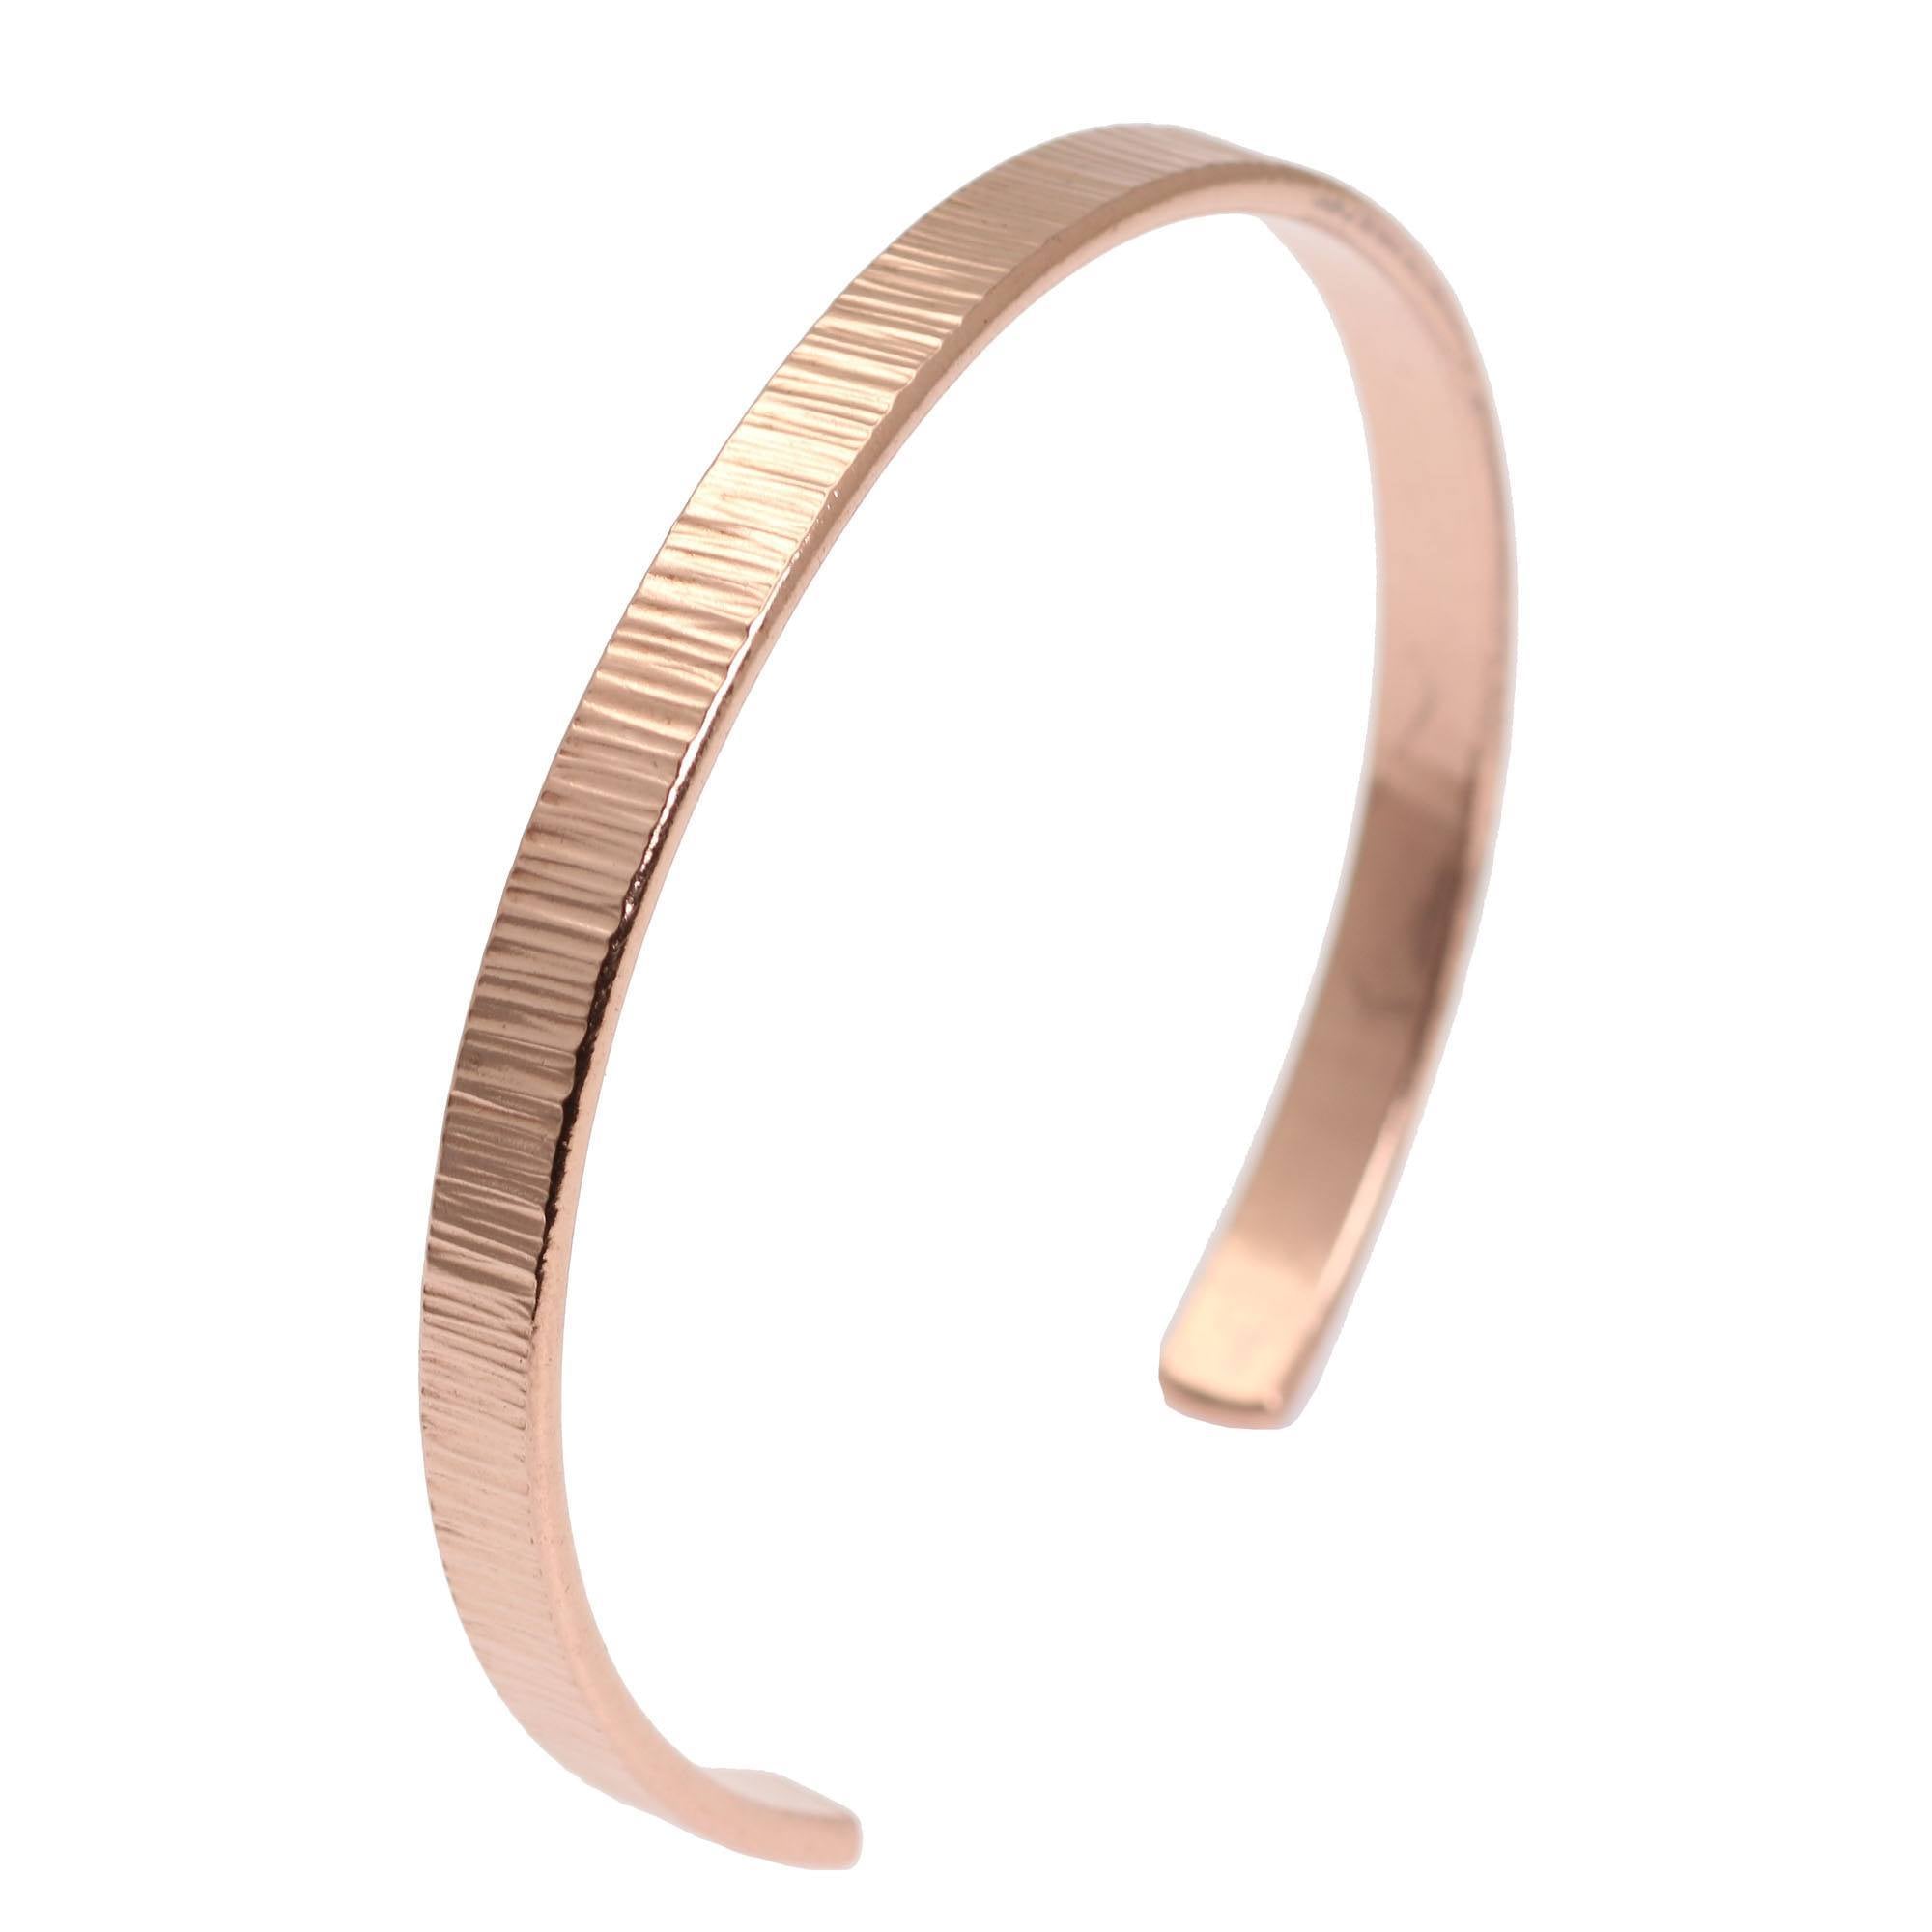 Chased Thin Copper Cuff Bracelet